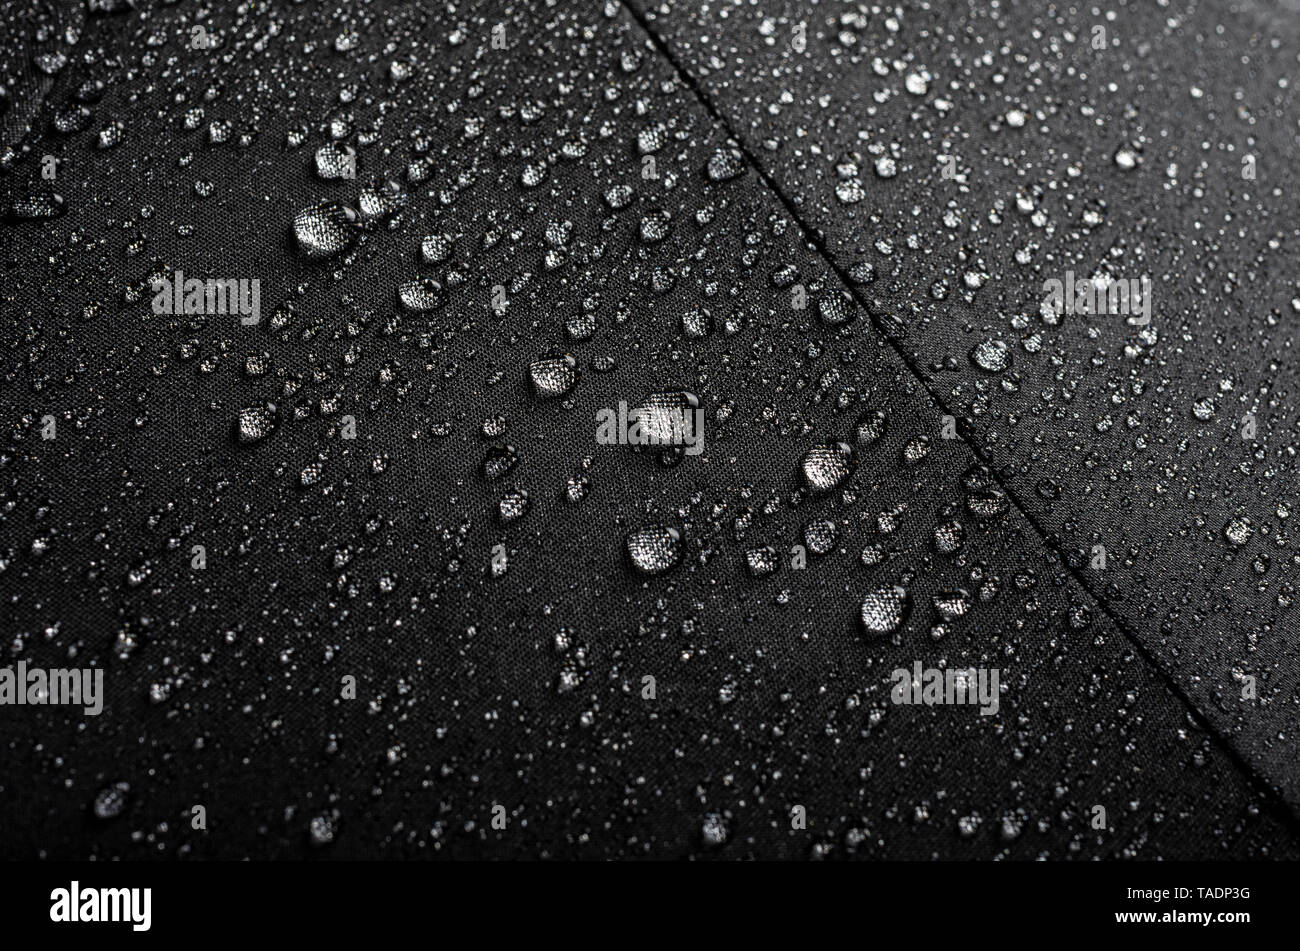 Black waterproof umbrella texture with water droplets Stock Photo